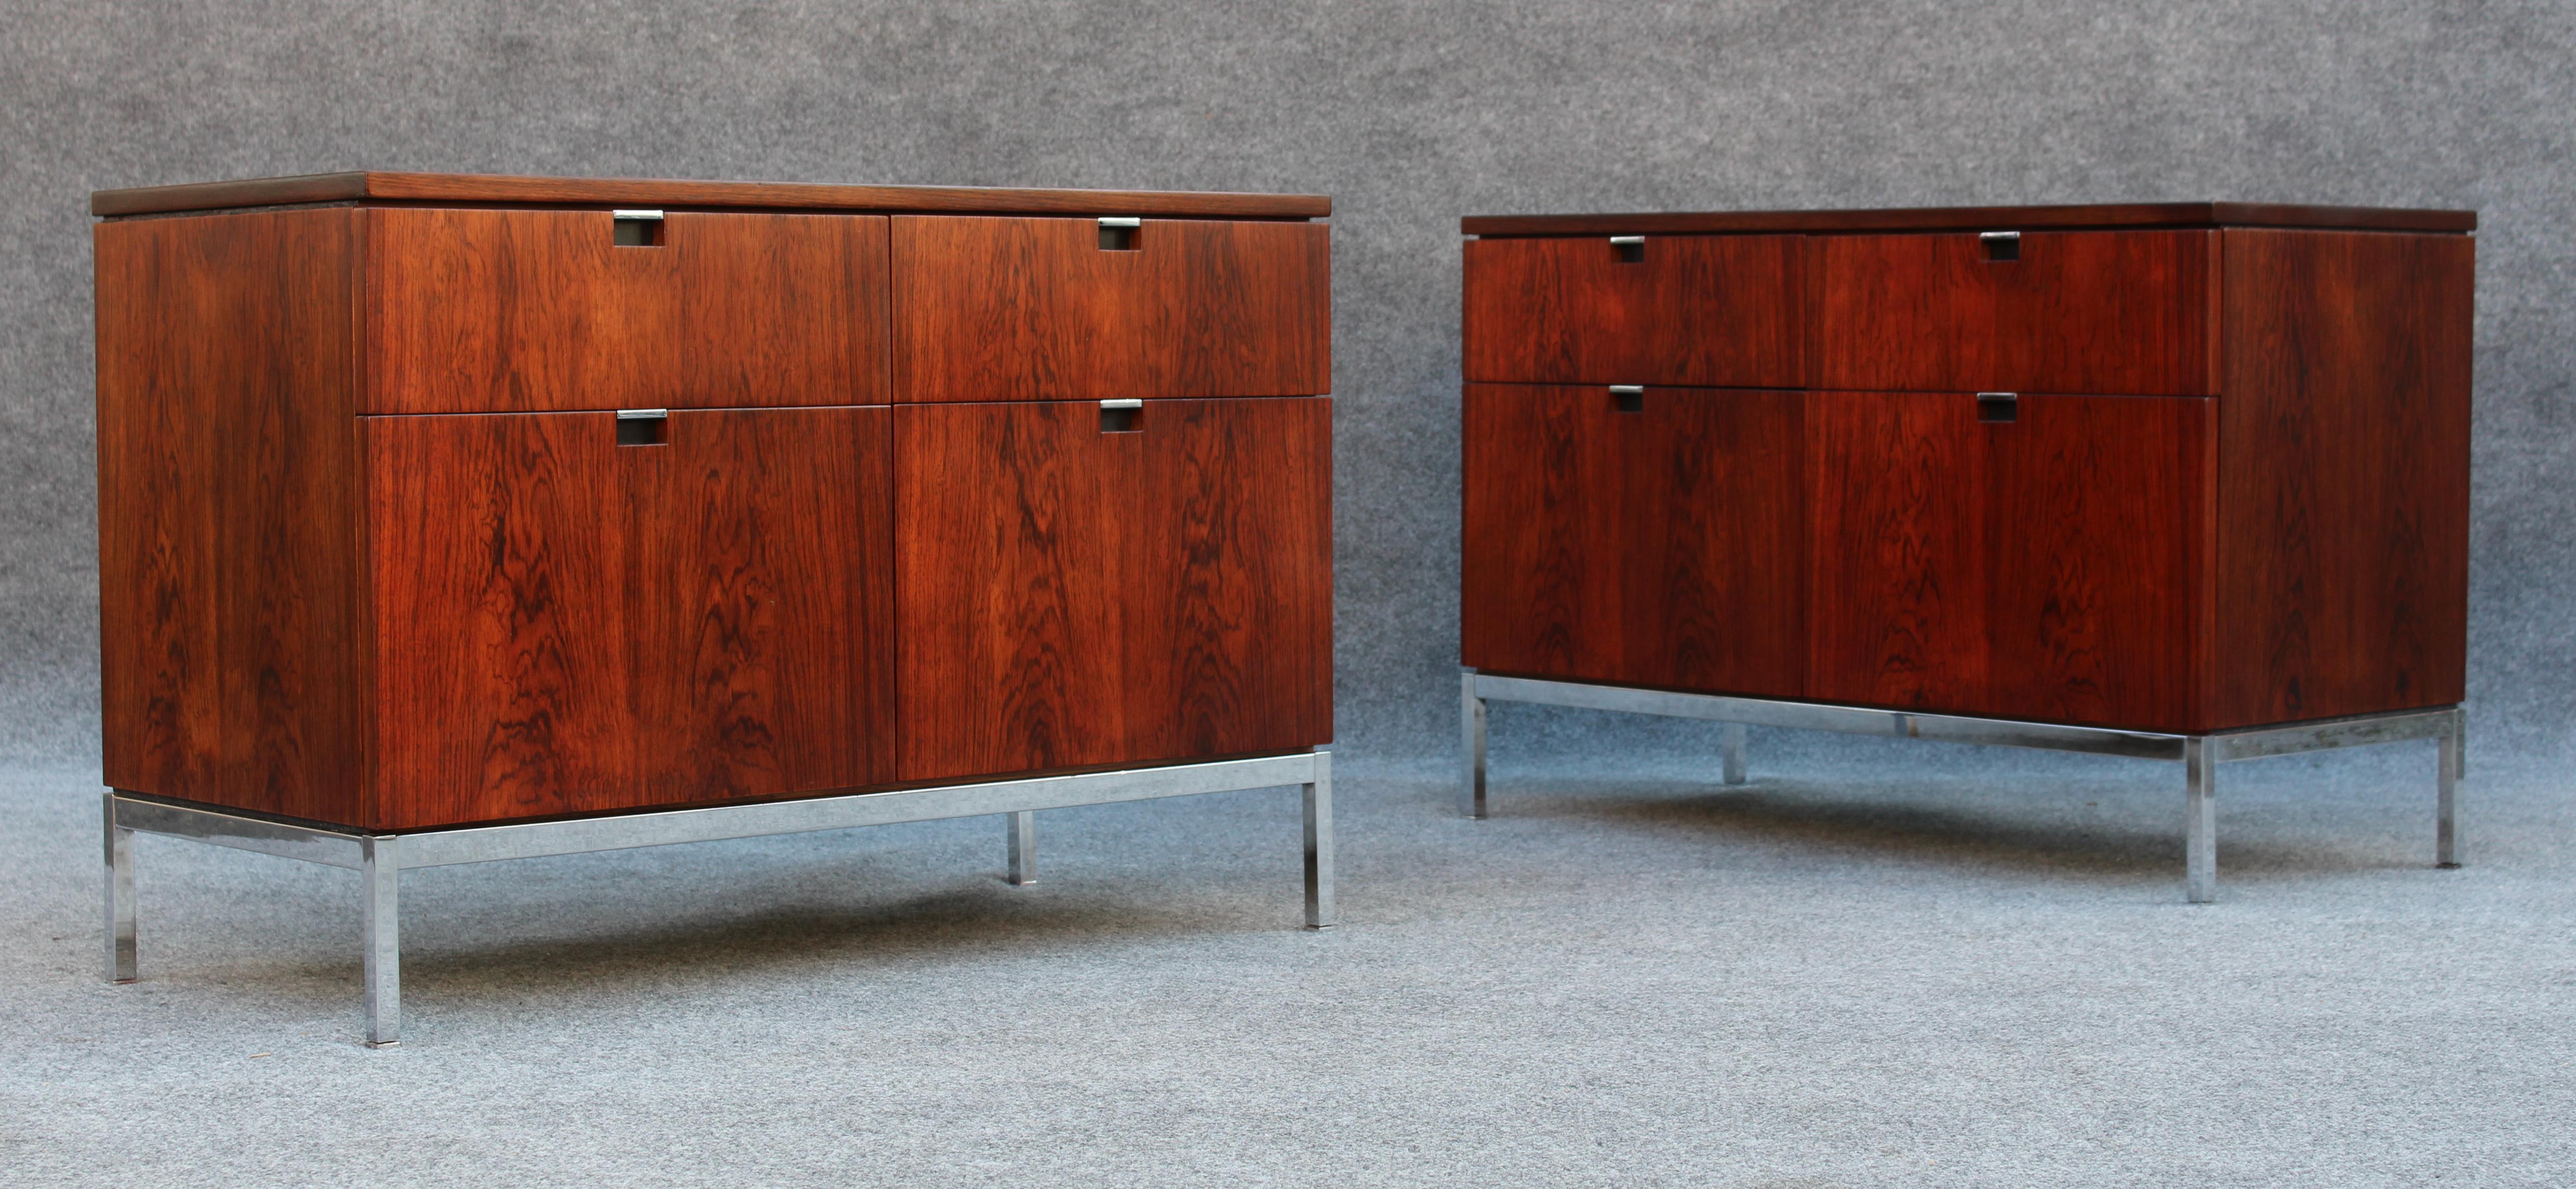 This set of cabinets is quite rare. These are not simply two of the same cabinet, they are a custom matched set. These were not readily availible from Knoll when they were made in the 1970s. Each wood panel from the front to the back is bookmatched